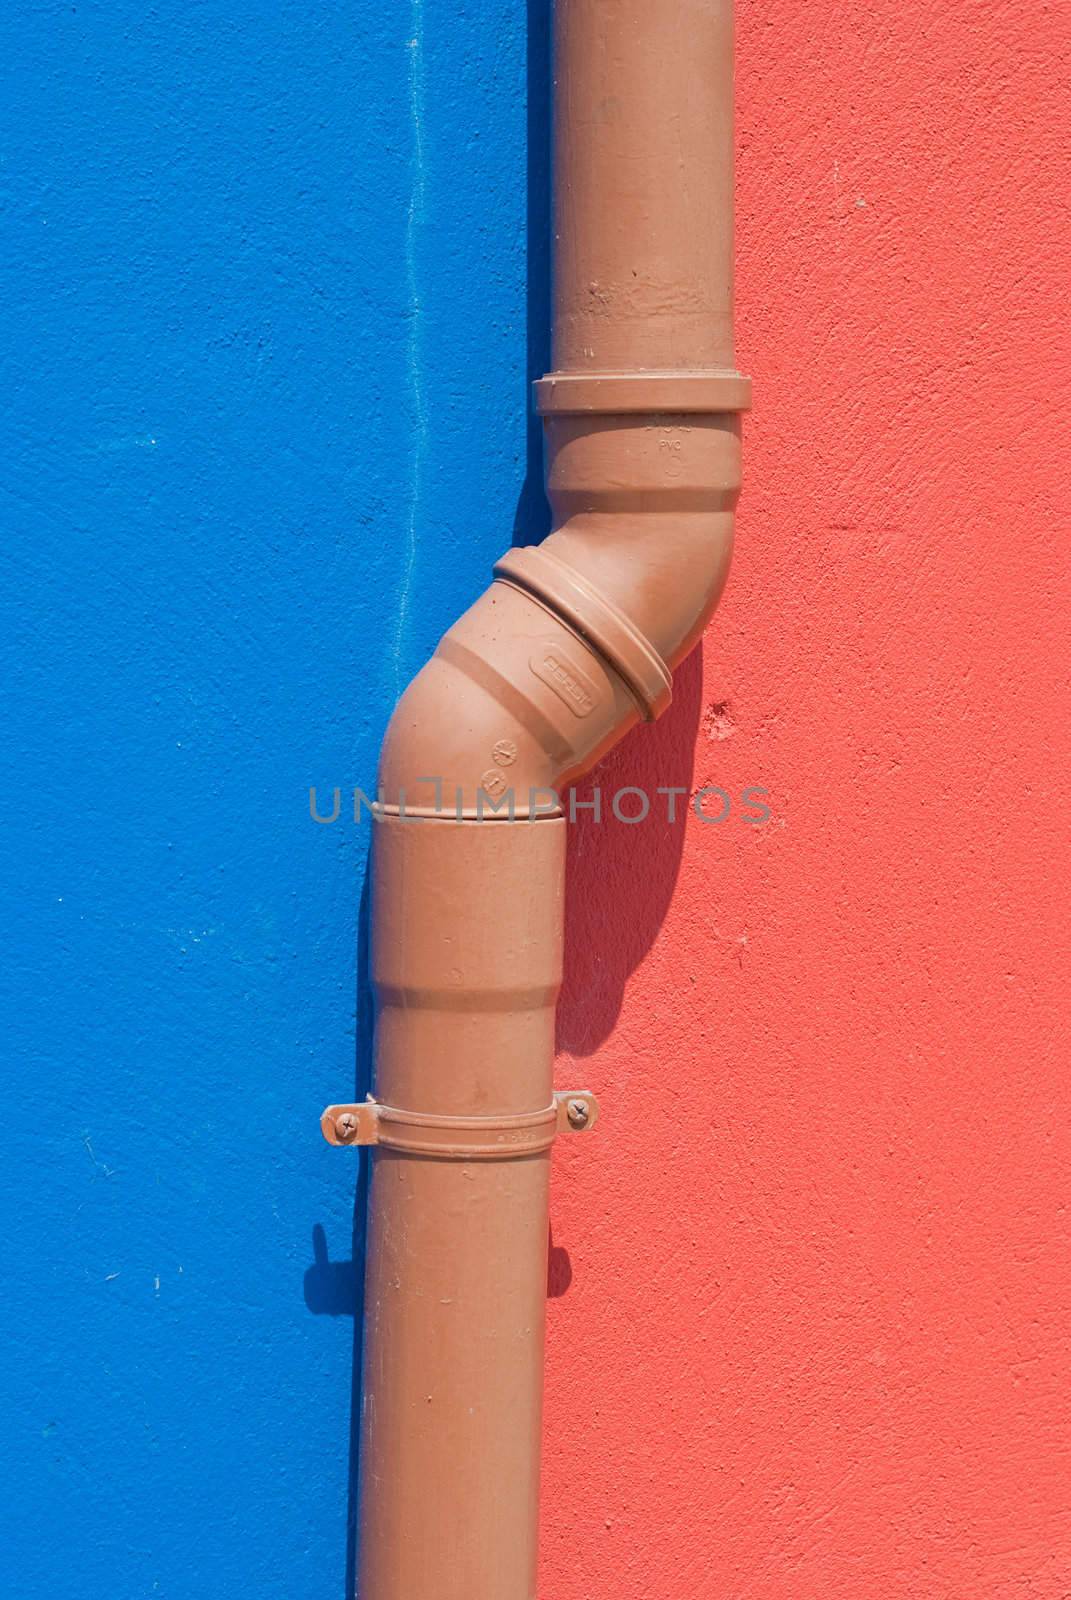 Plumbing pipe on two color wall / abstract grungy background